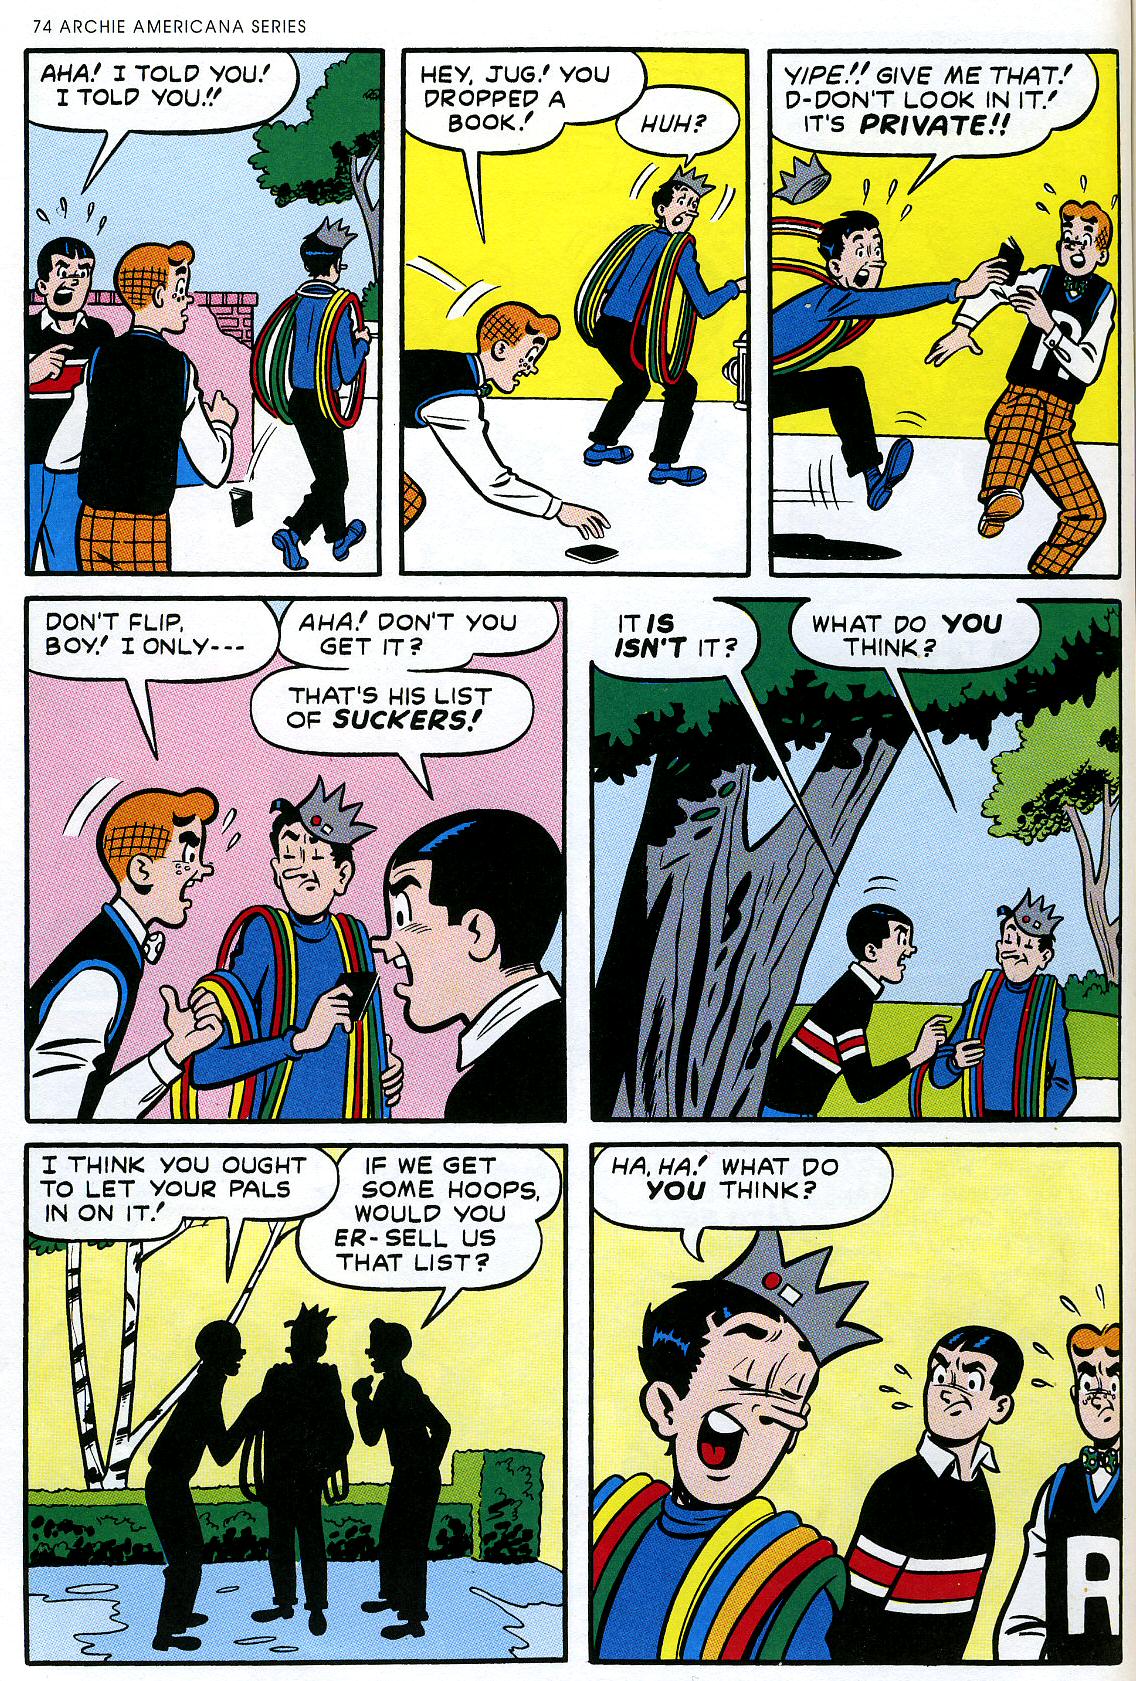 Read online Archie Americana Series comic -  Issue # TPB 2 - 76